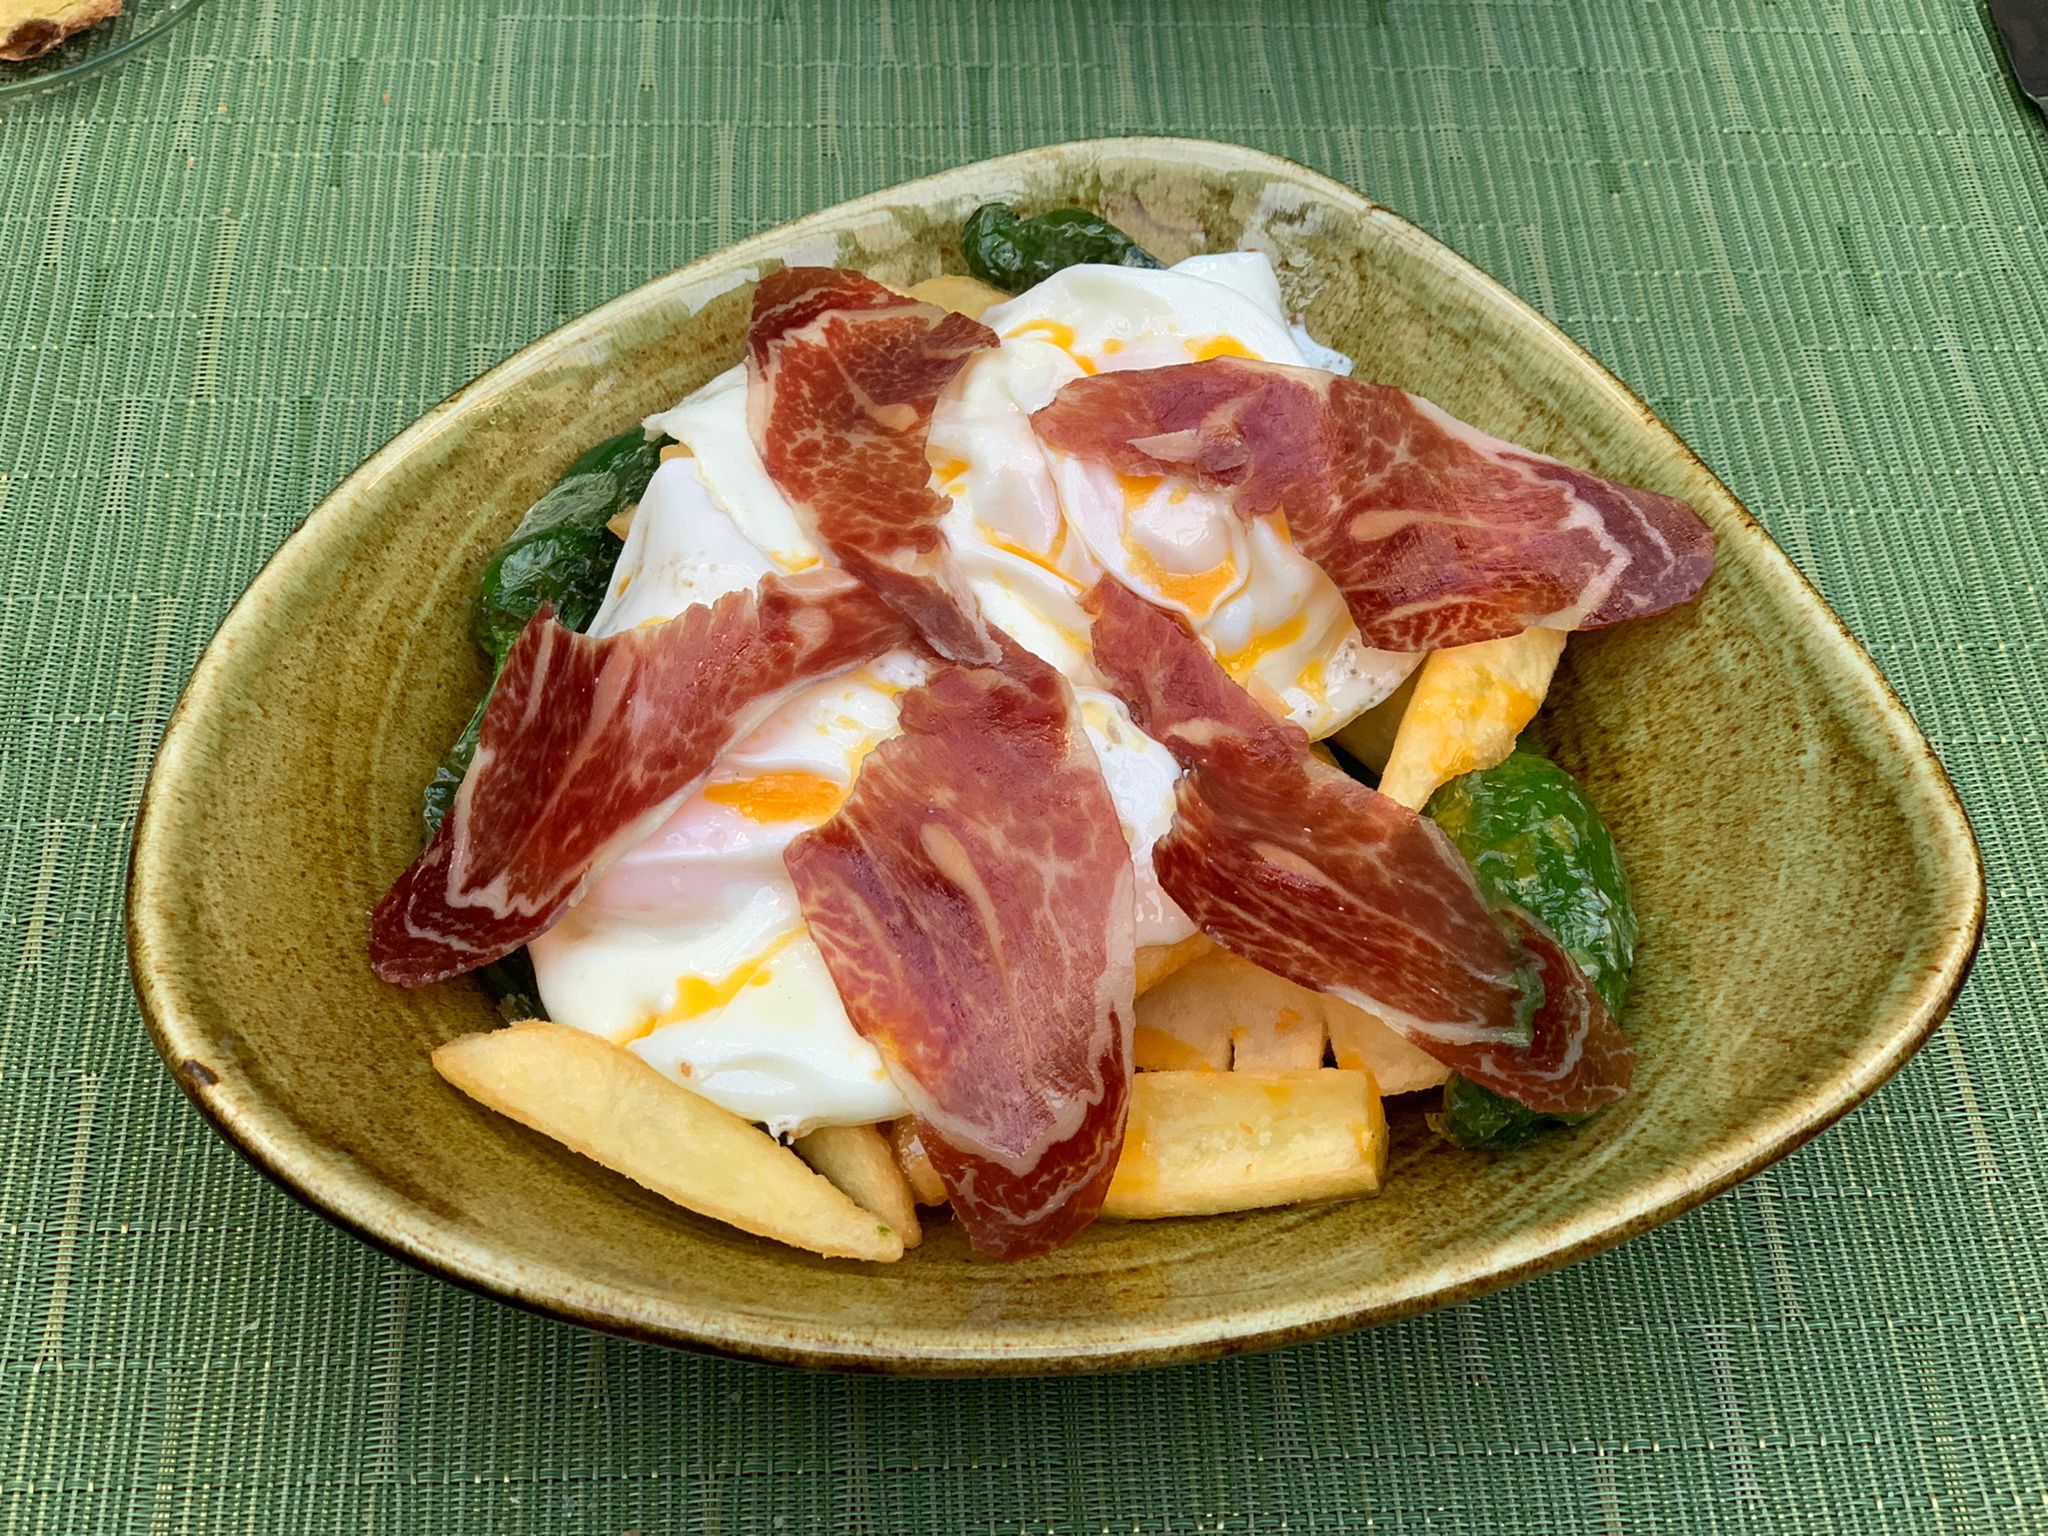 Fried eggs "Madrid style", with potatoes and Iberian ham